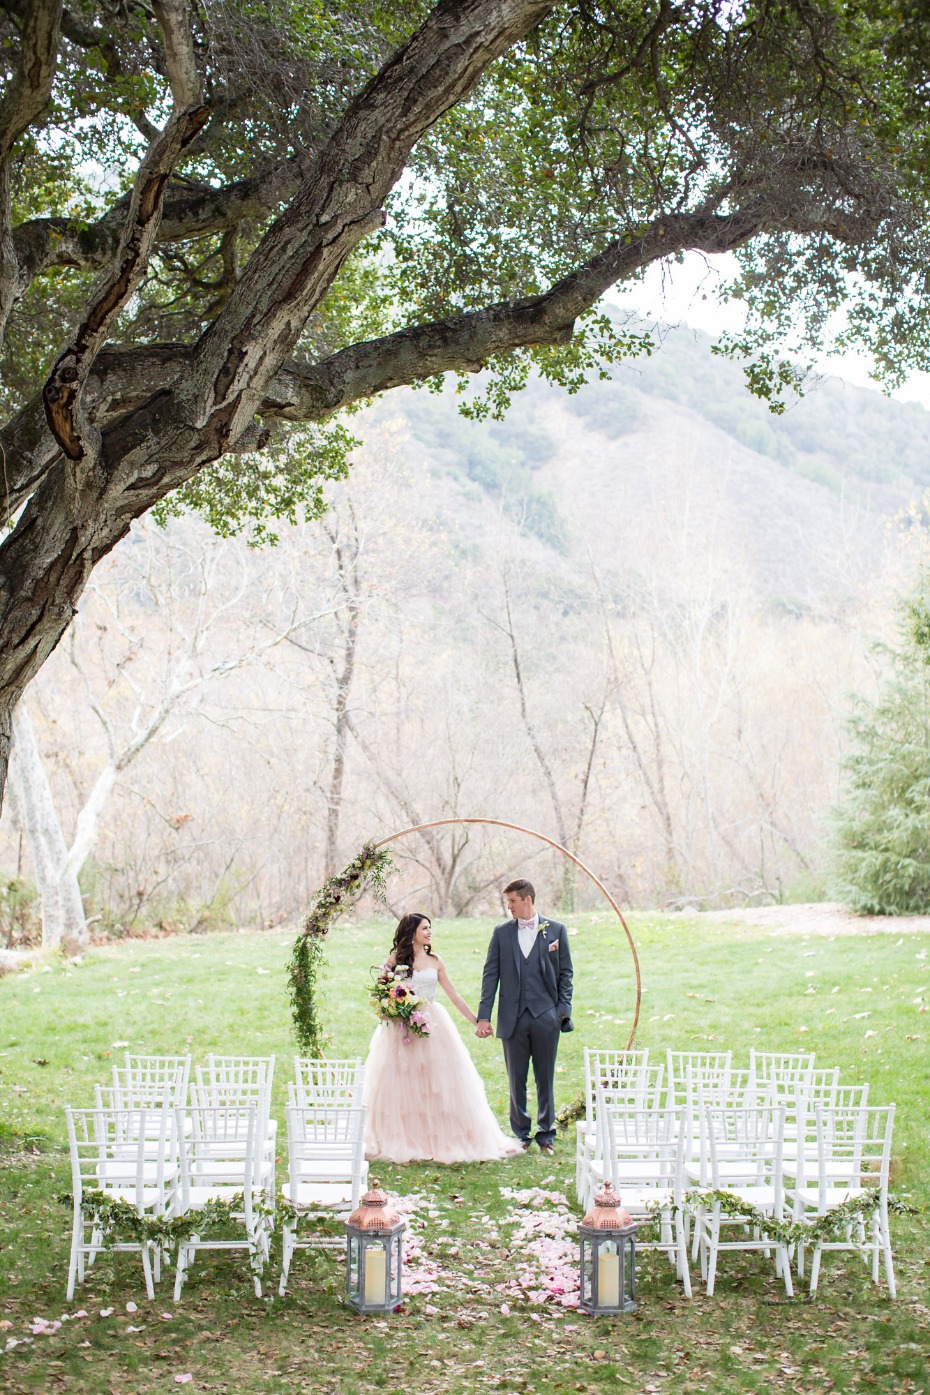 Outdoor ceremony with circle arch